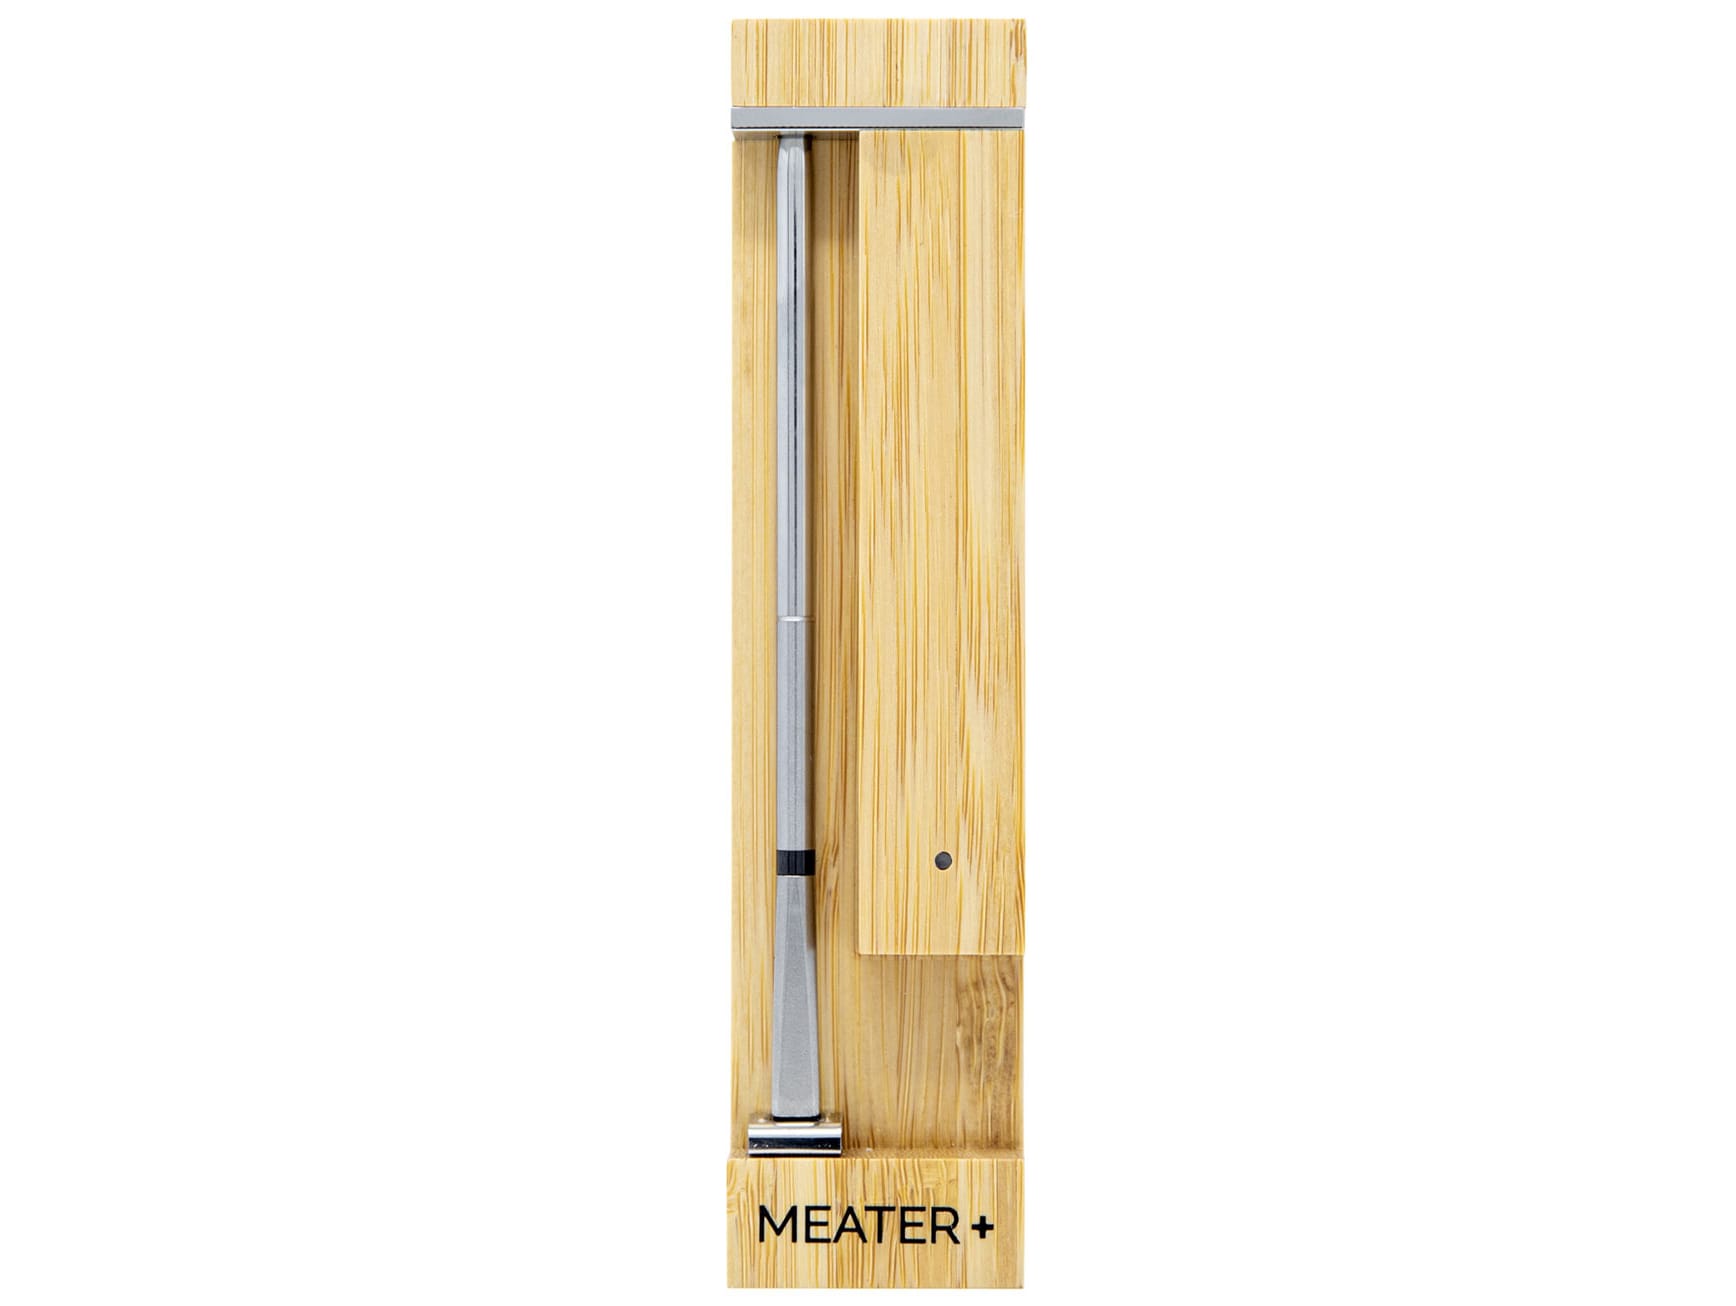 Meater 2 Plus review: A more precise and durable wireless meat thermometer